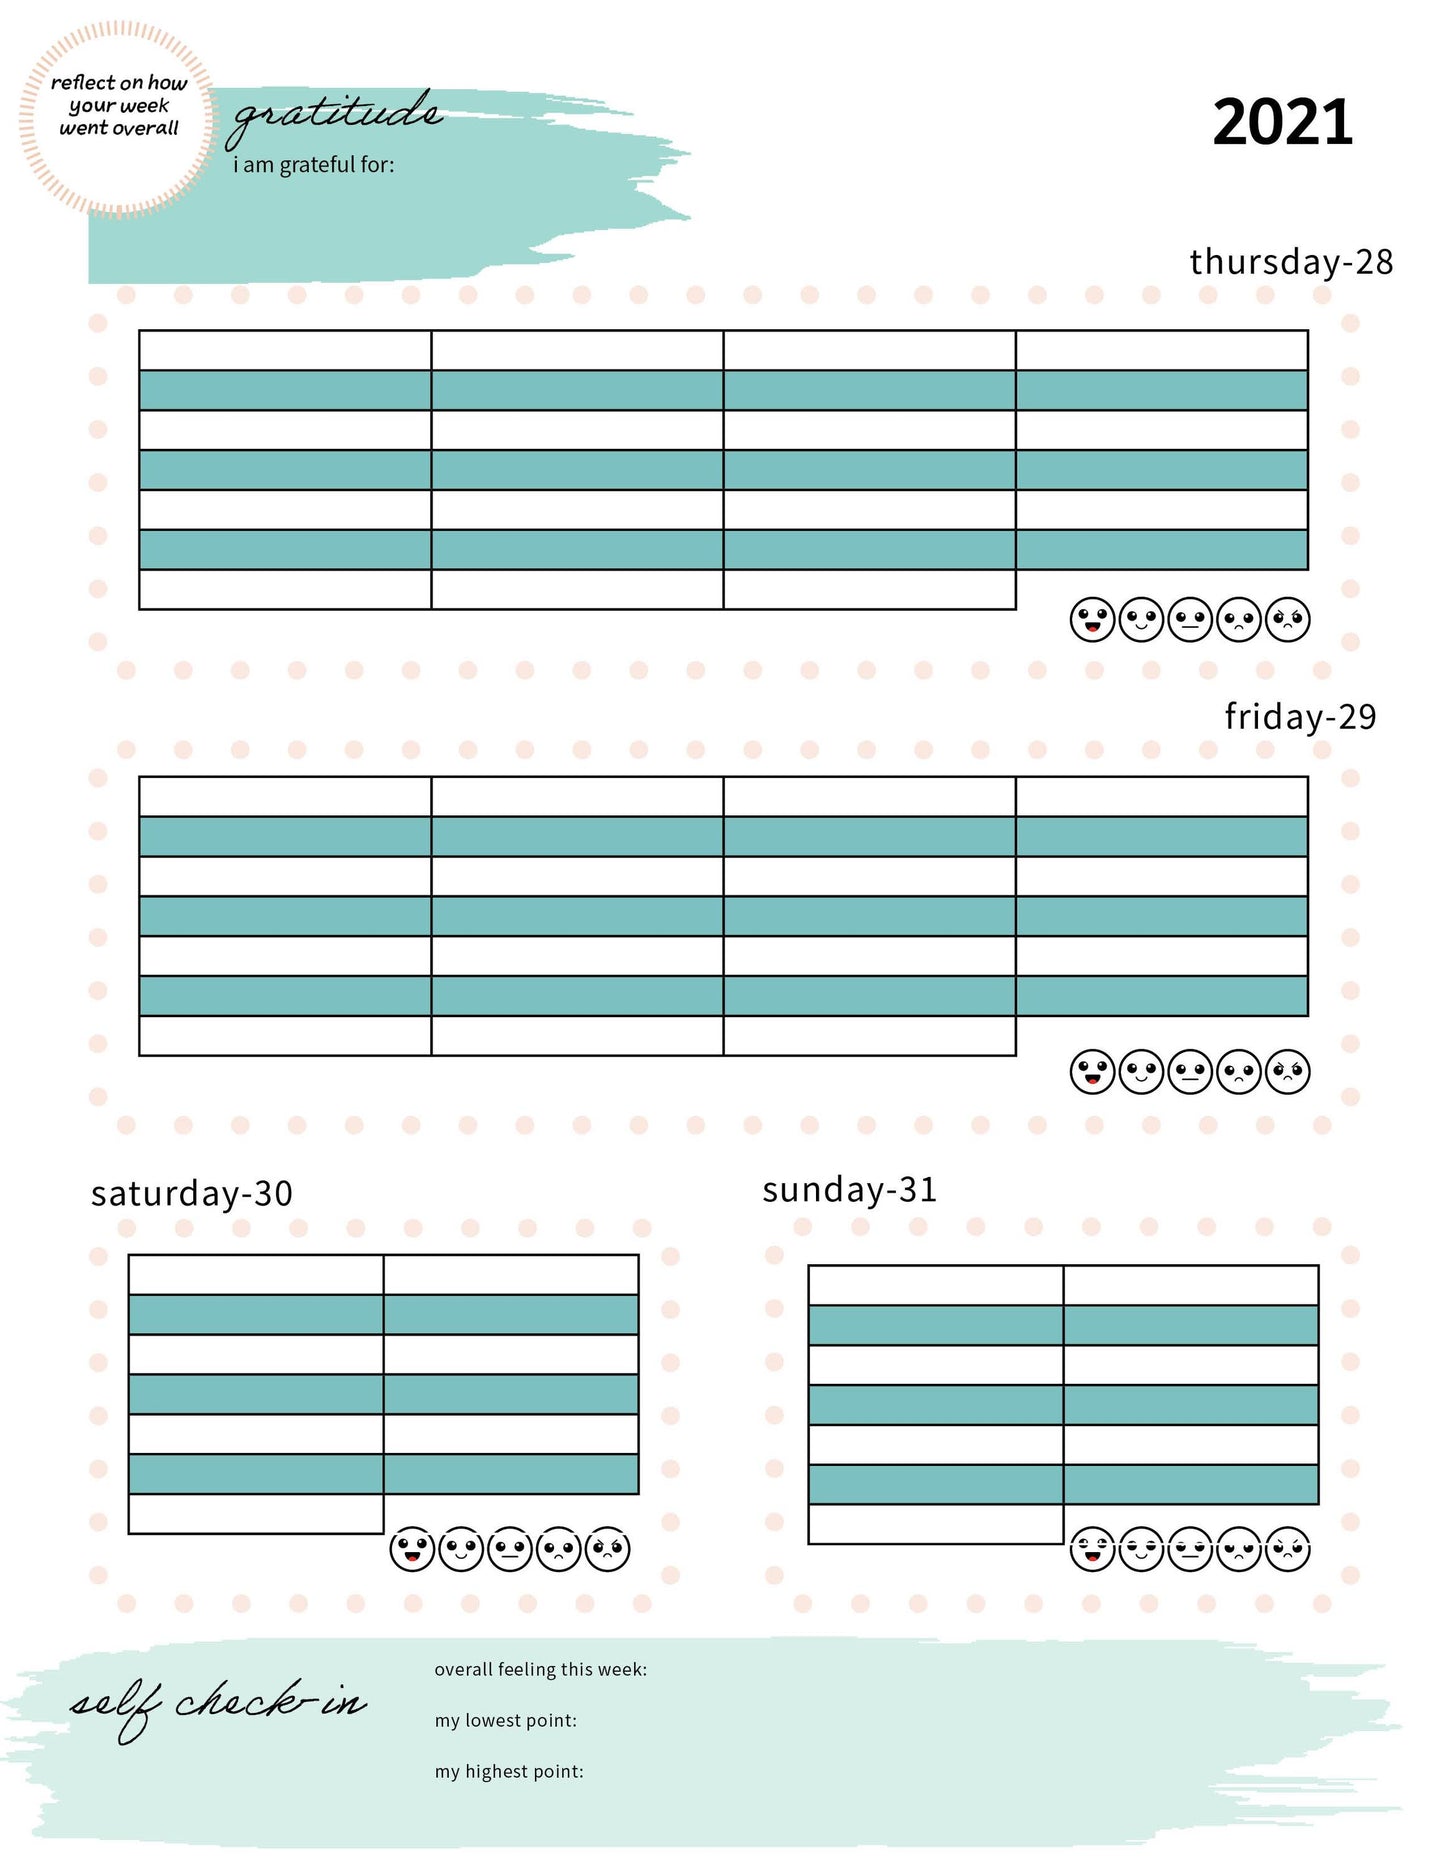 CBT Daily Planner (Undated)